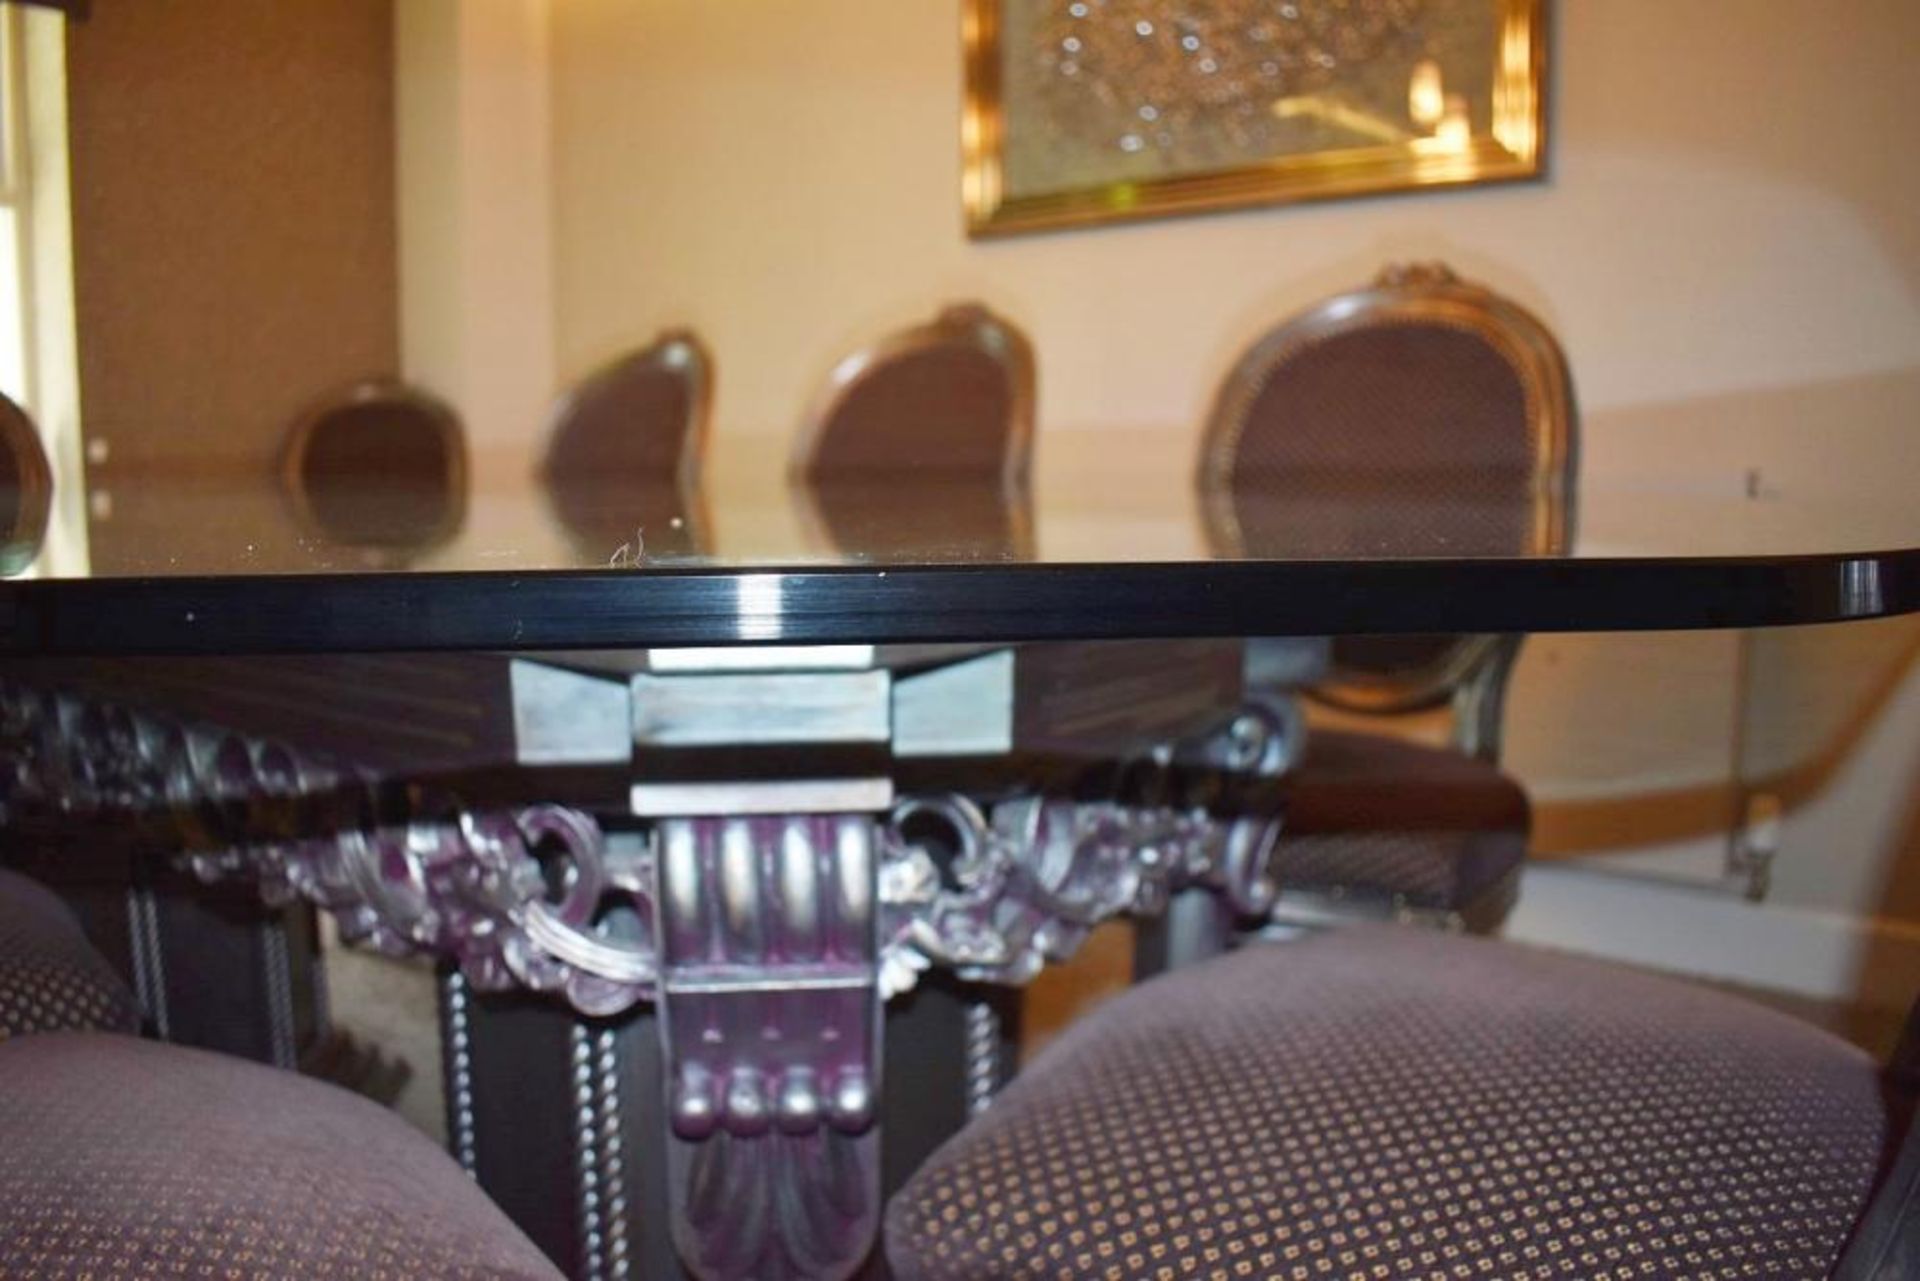 1 x Grand Glass Table With Baroque Legs And Chairs Set - CL407 - Location Bowdon WA14 - Image 4 of 21